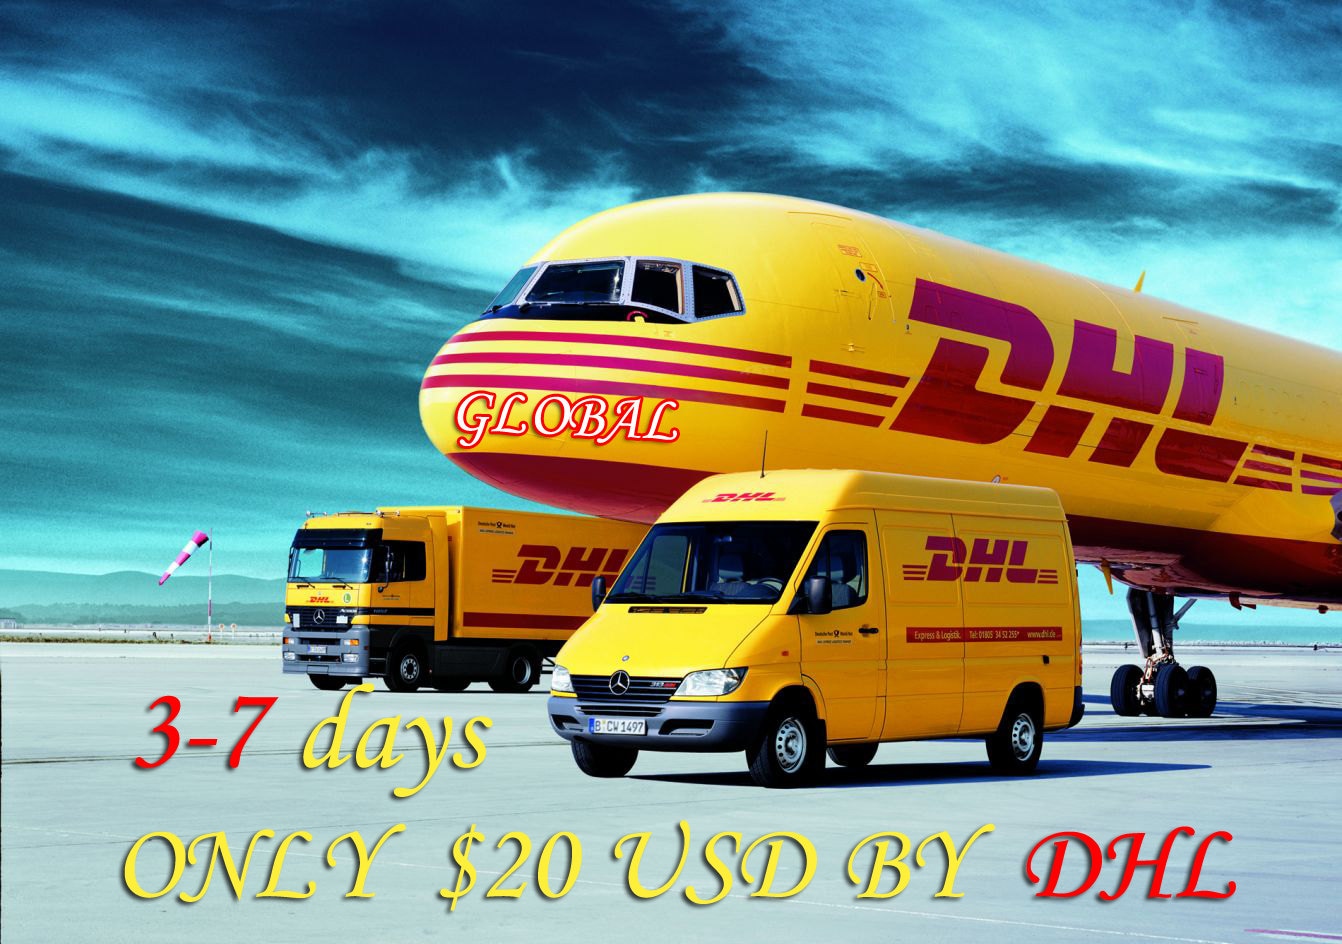 Pay more 20 USD for sending by DHL to EVERYWHERE